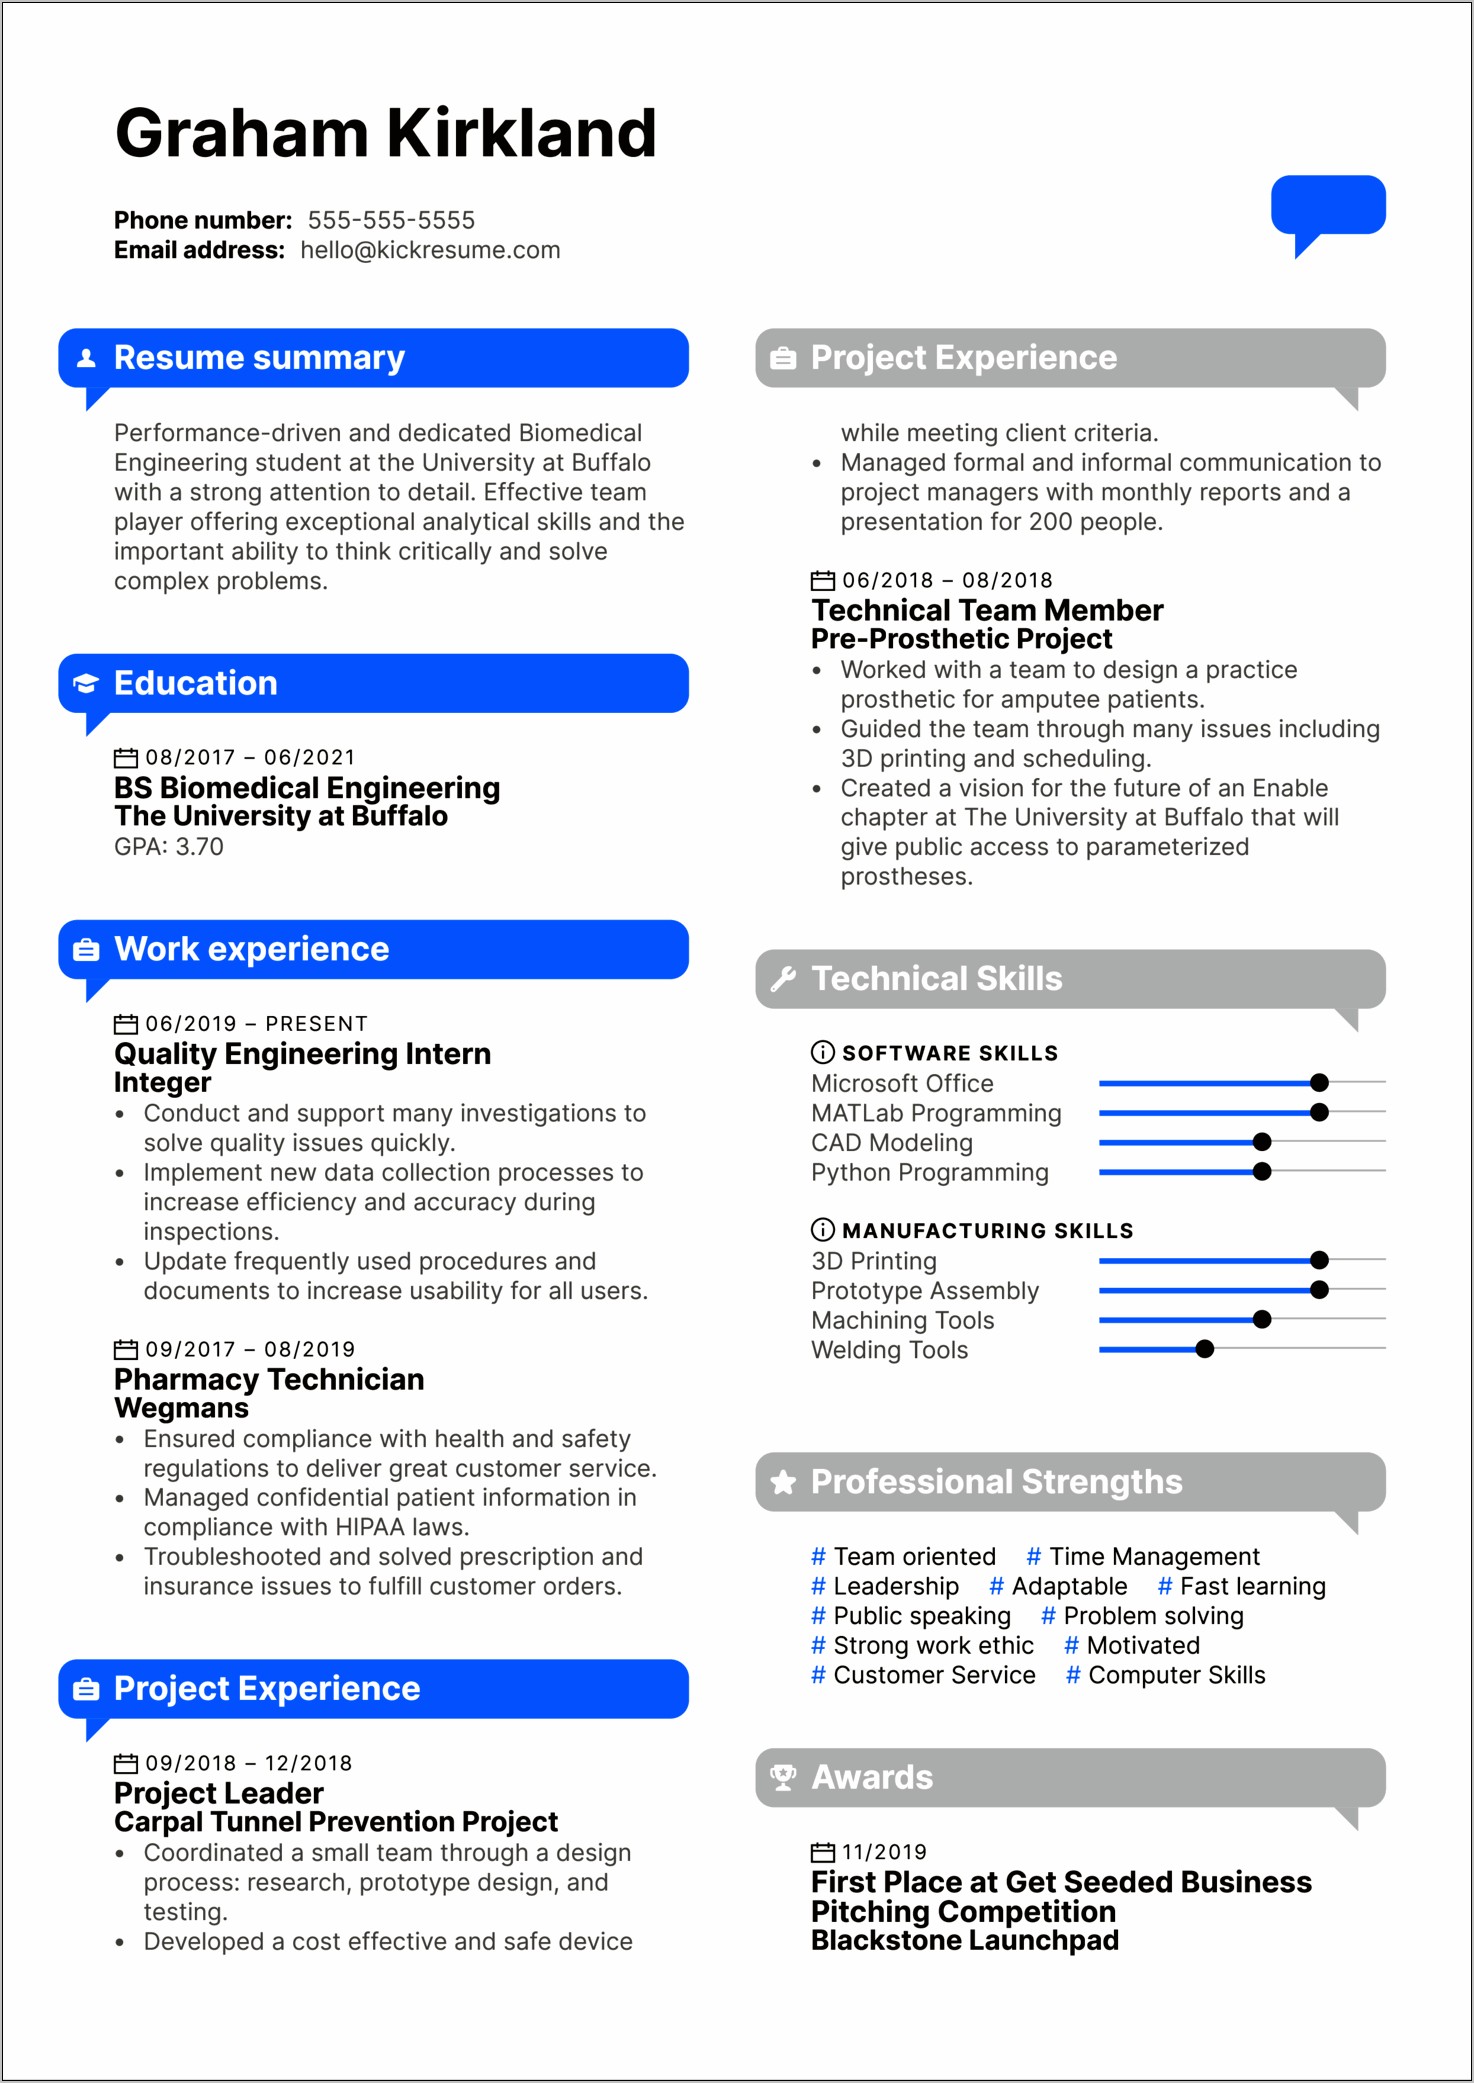 Customer Service Resume Examples 2019